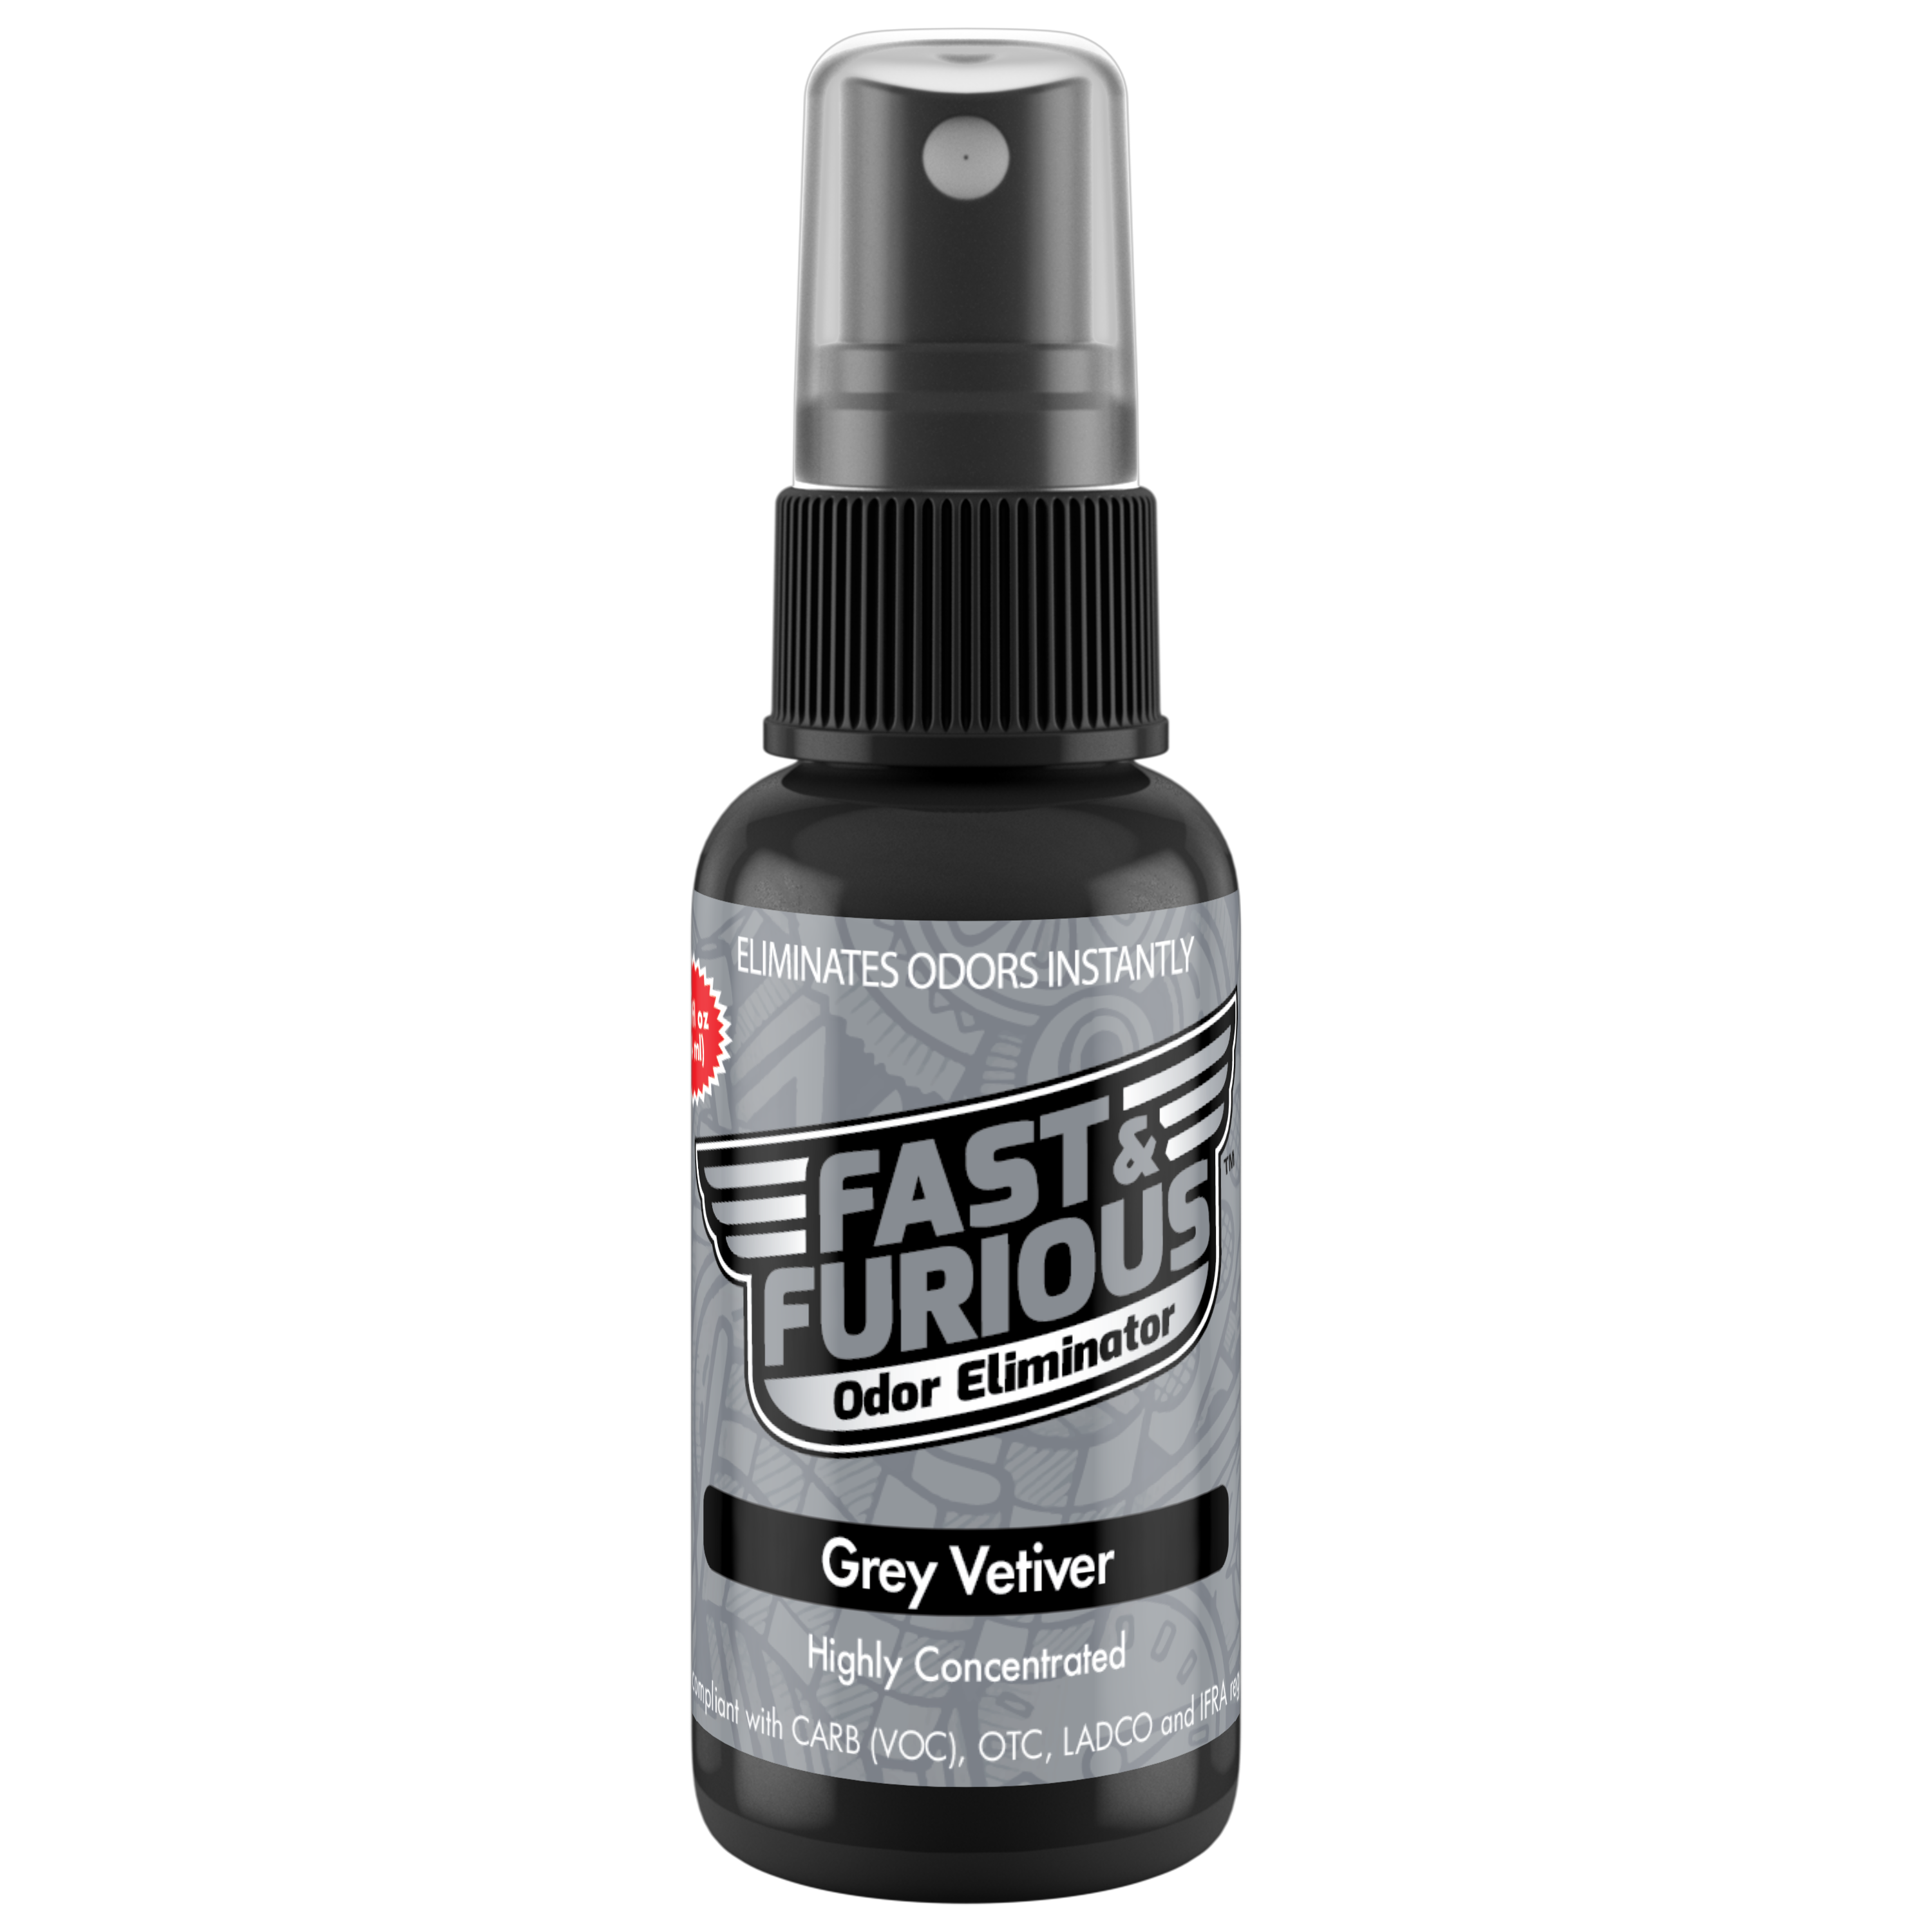 Fast and Furious Odor Eliminator - Grey Vetiver Scent